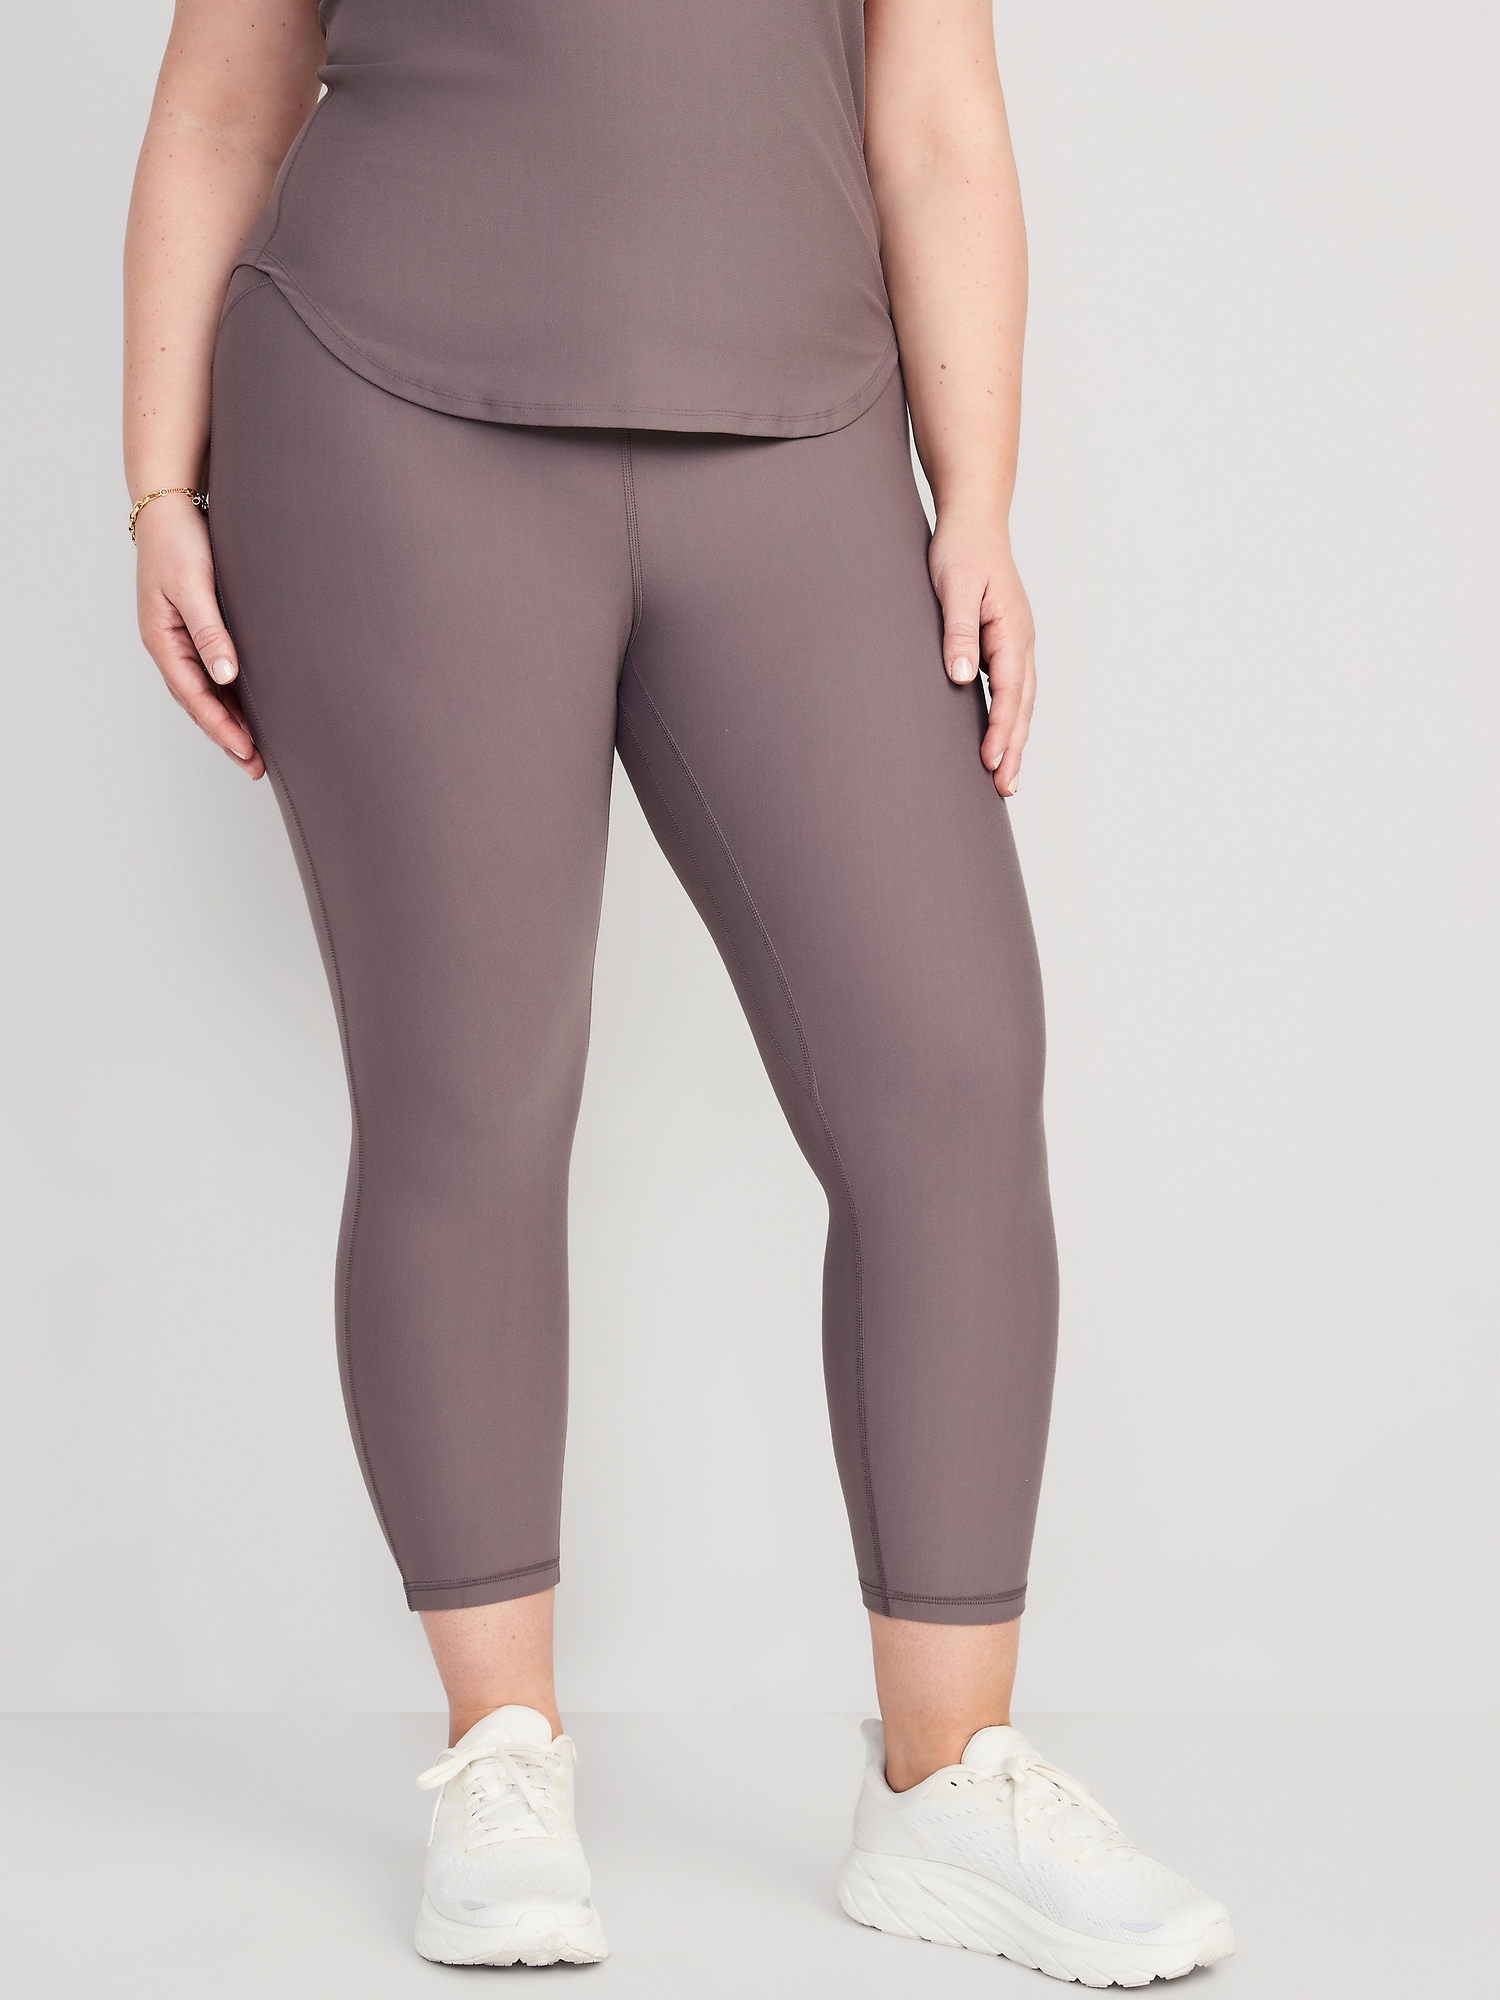 Extra High-Waisted PowerLite Lycra® ADAPTIV Cropped Leggings for